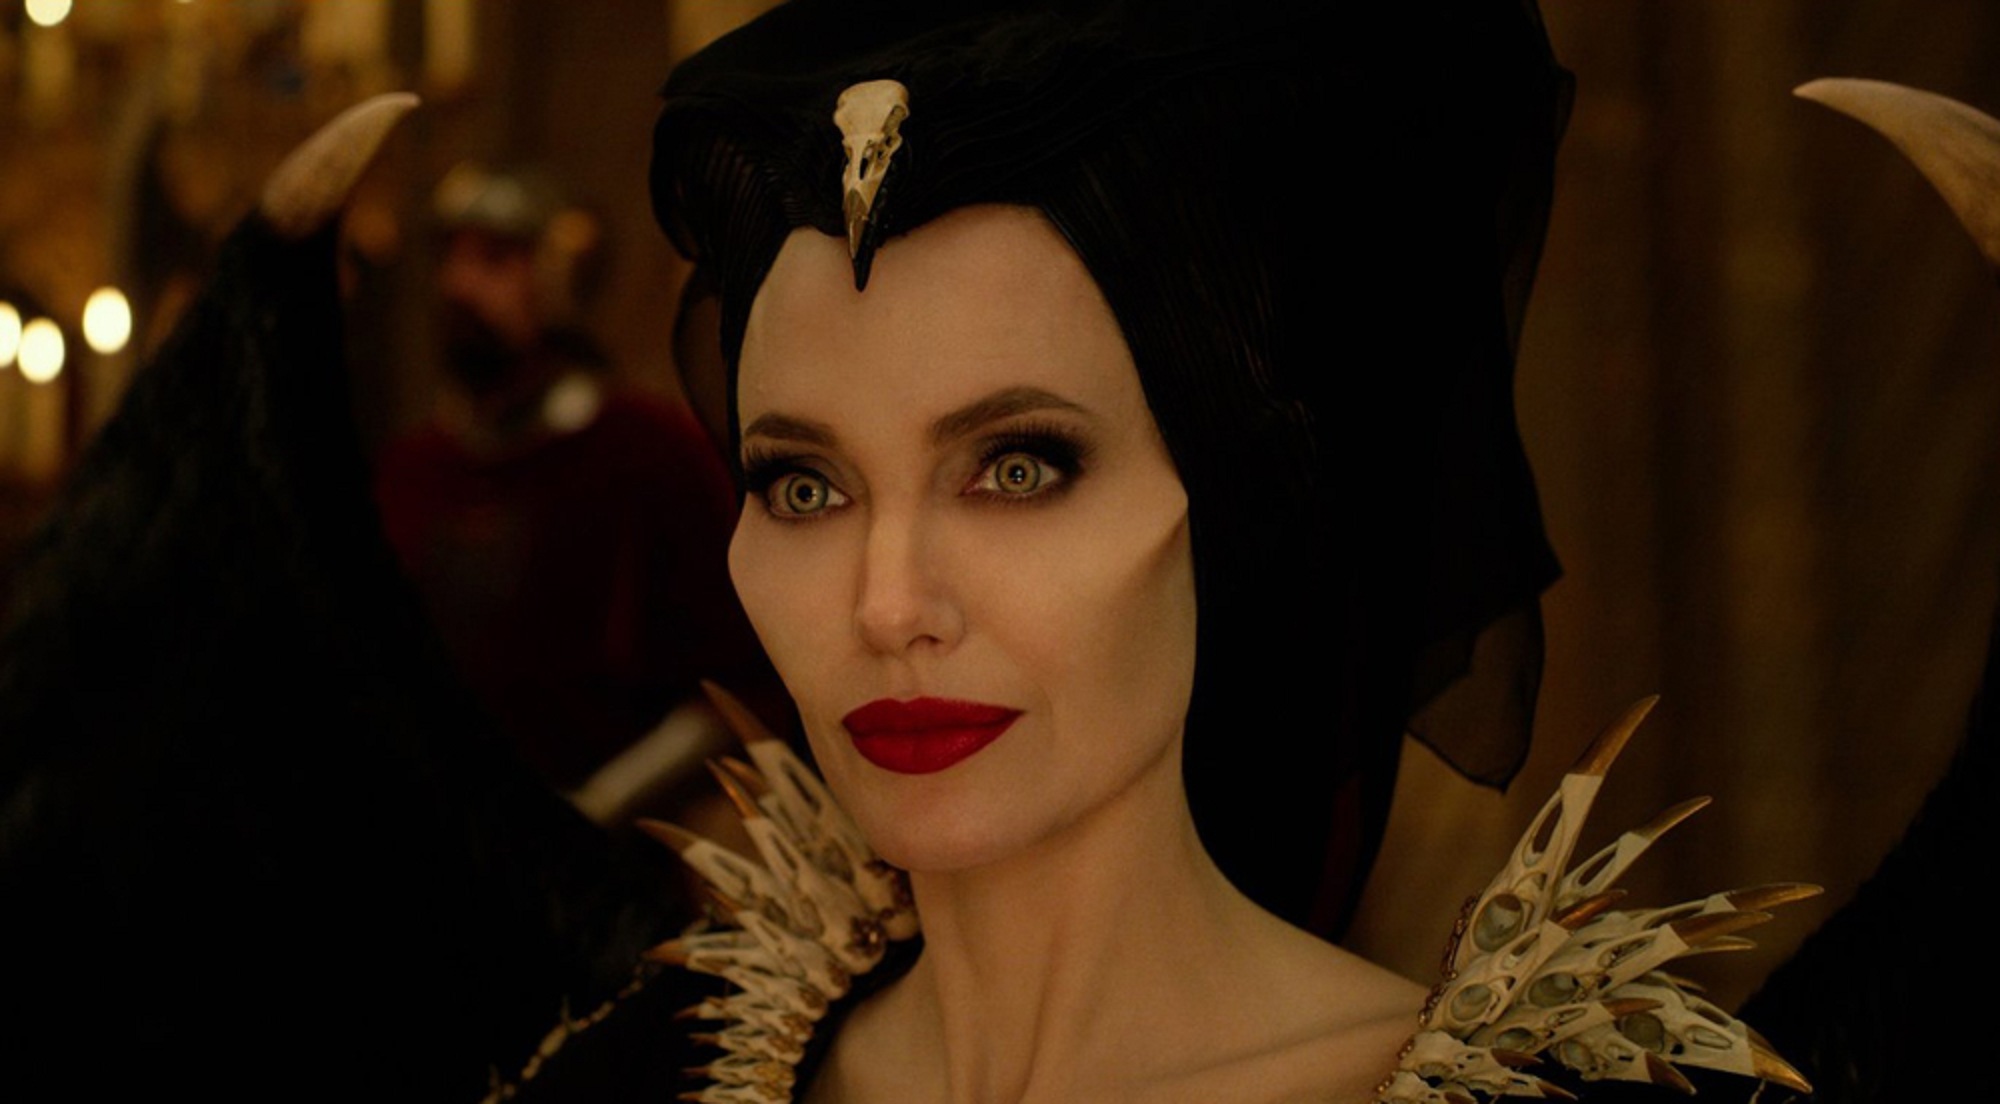 Watch: First Trailer For Maleficent 2, Starring Angelina Jolie, is Out!